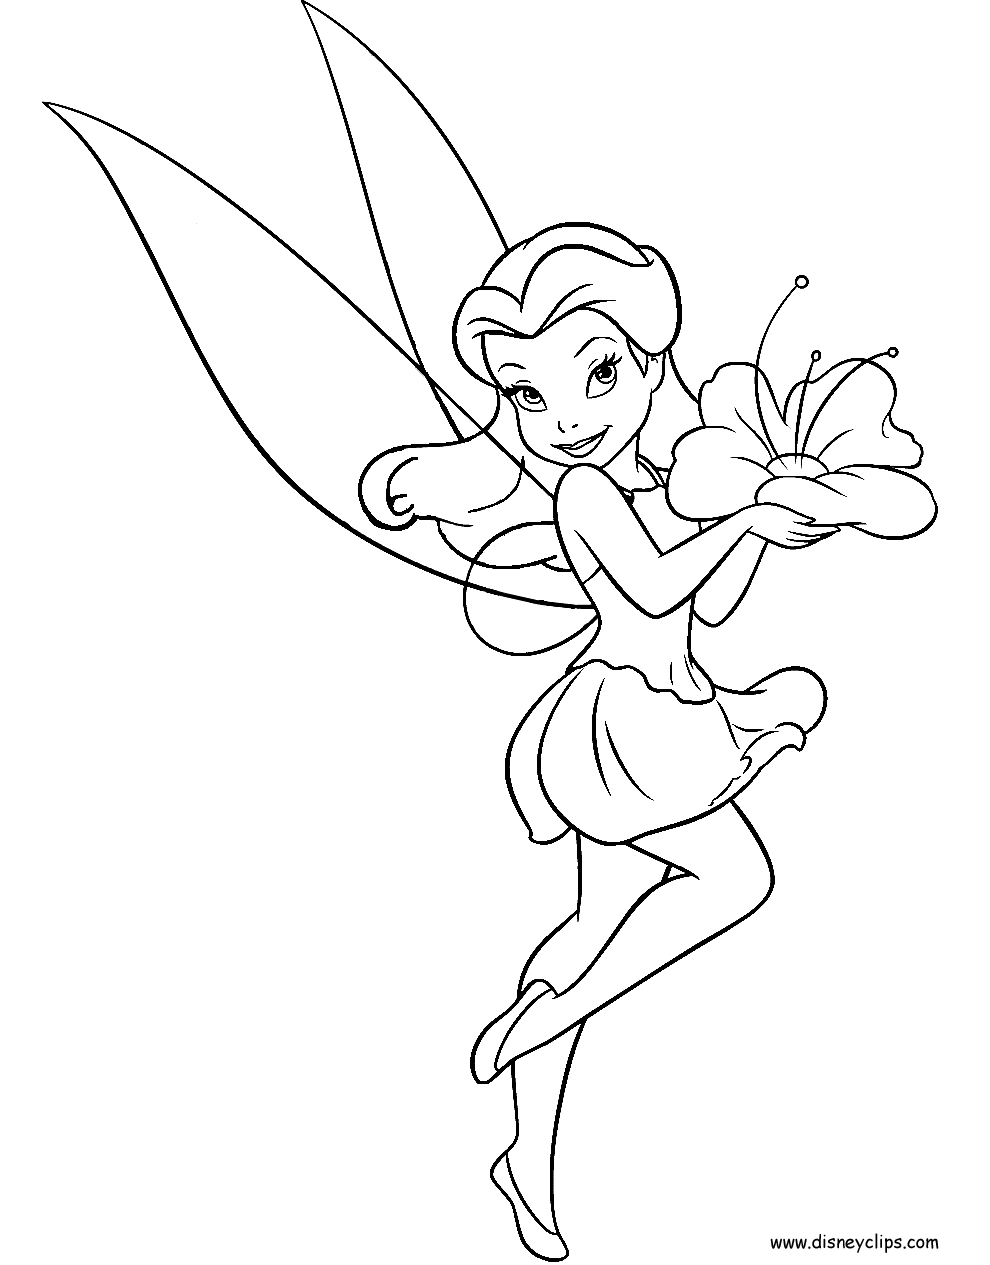 Download Pin by Colleen Mapes on tinker bell | Tinkerbell coloring ...